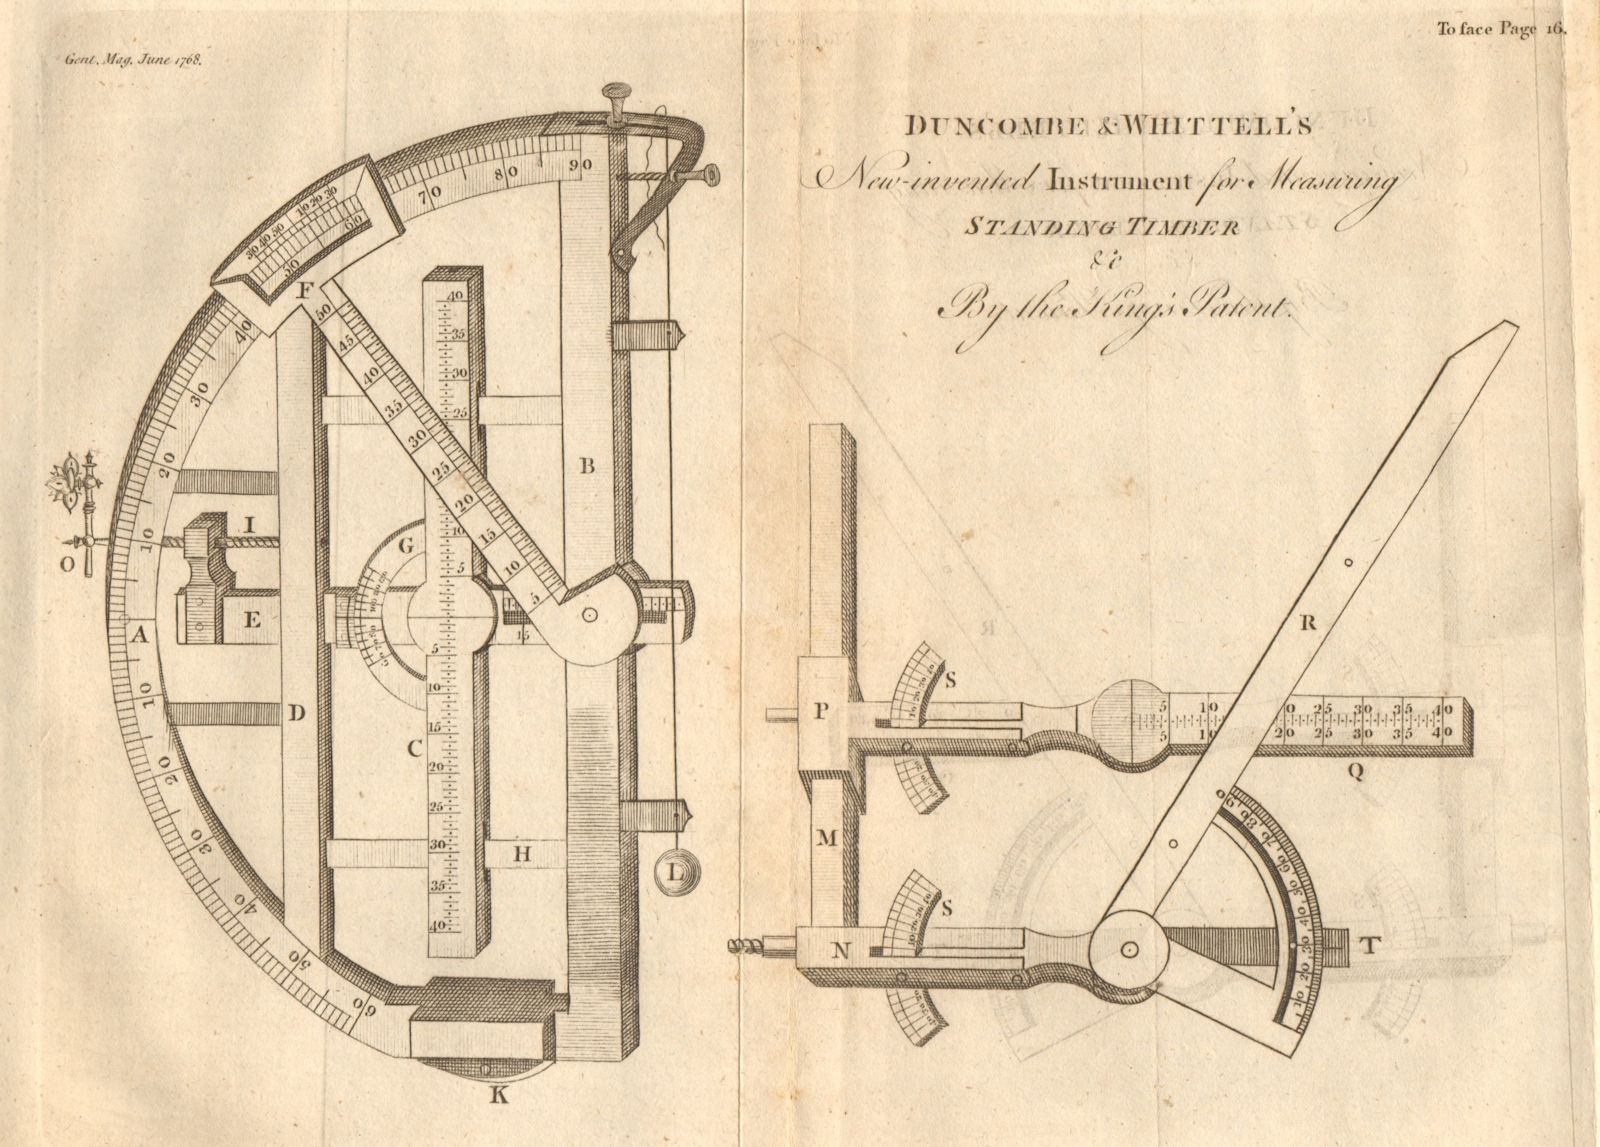 Associate Product Duncombe & Whittell's dendrometer for measuring standing timber. Patent 1768